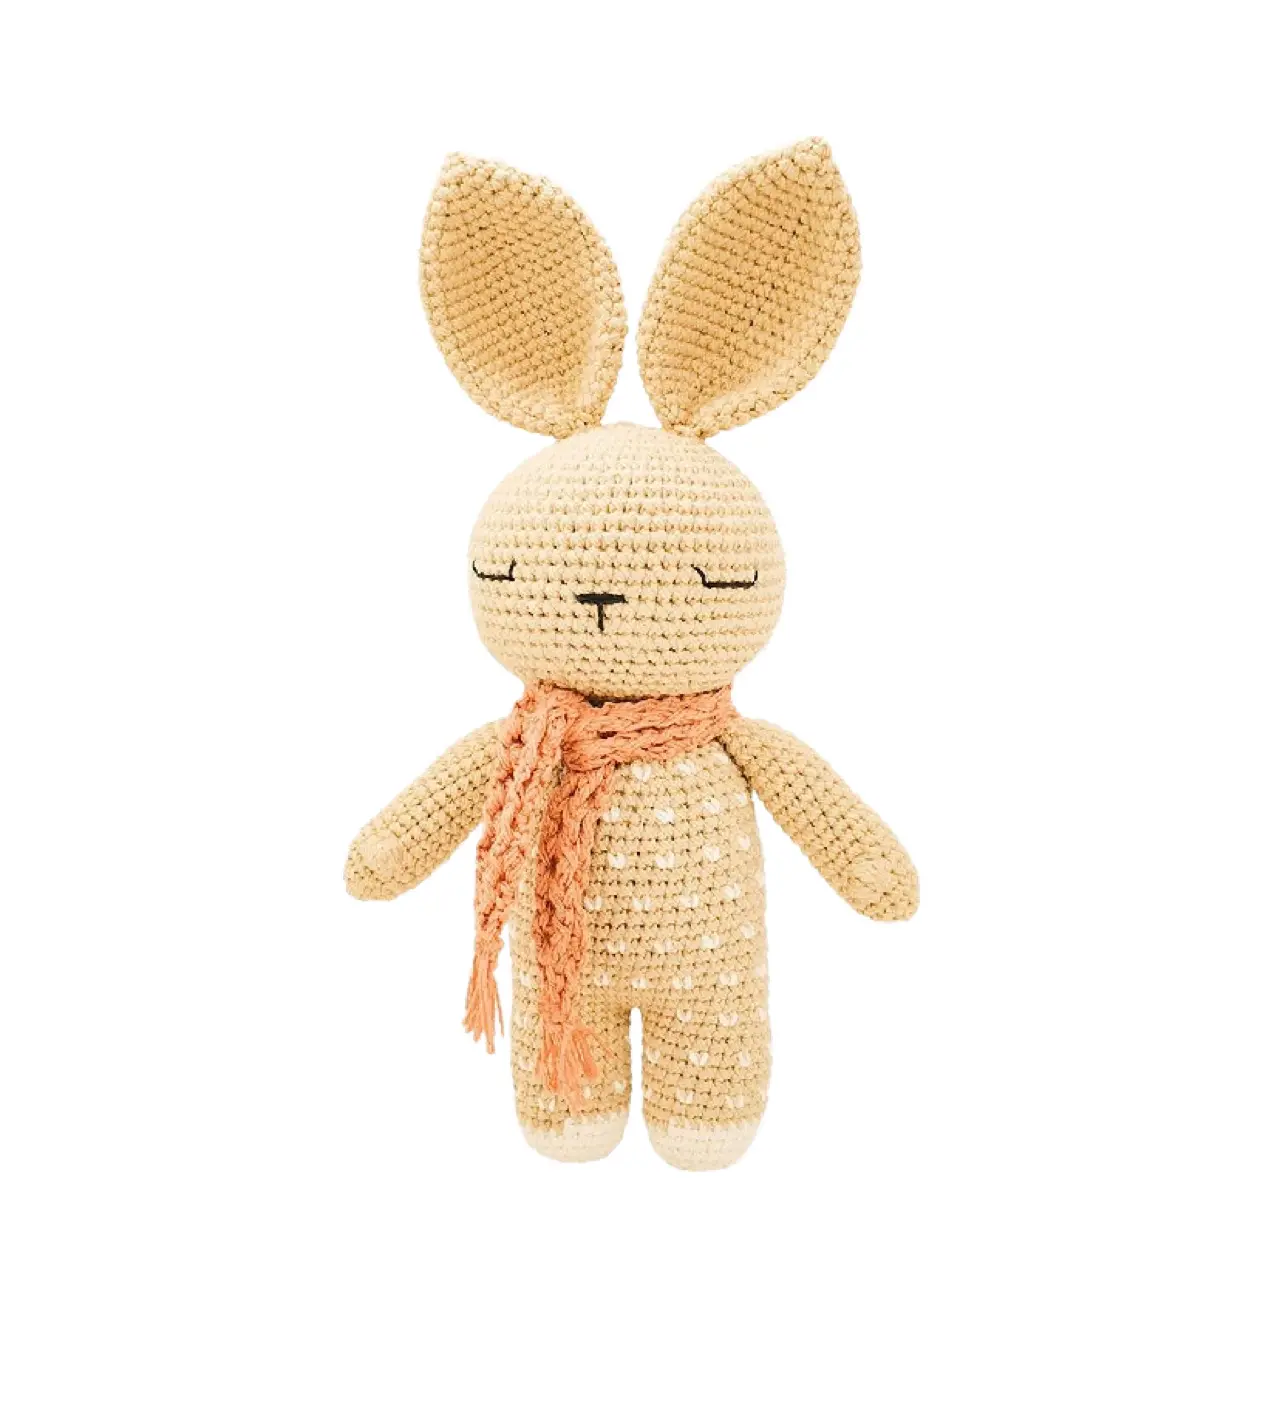 2023 Top Selling Crochet Stuffed Animals Bunny Knitted Stuffed Animal Toys amigurumi Toys for Babies Girls Boys and Adults